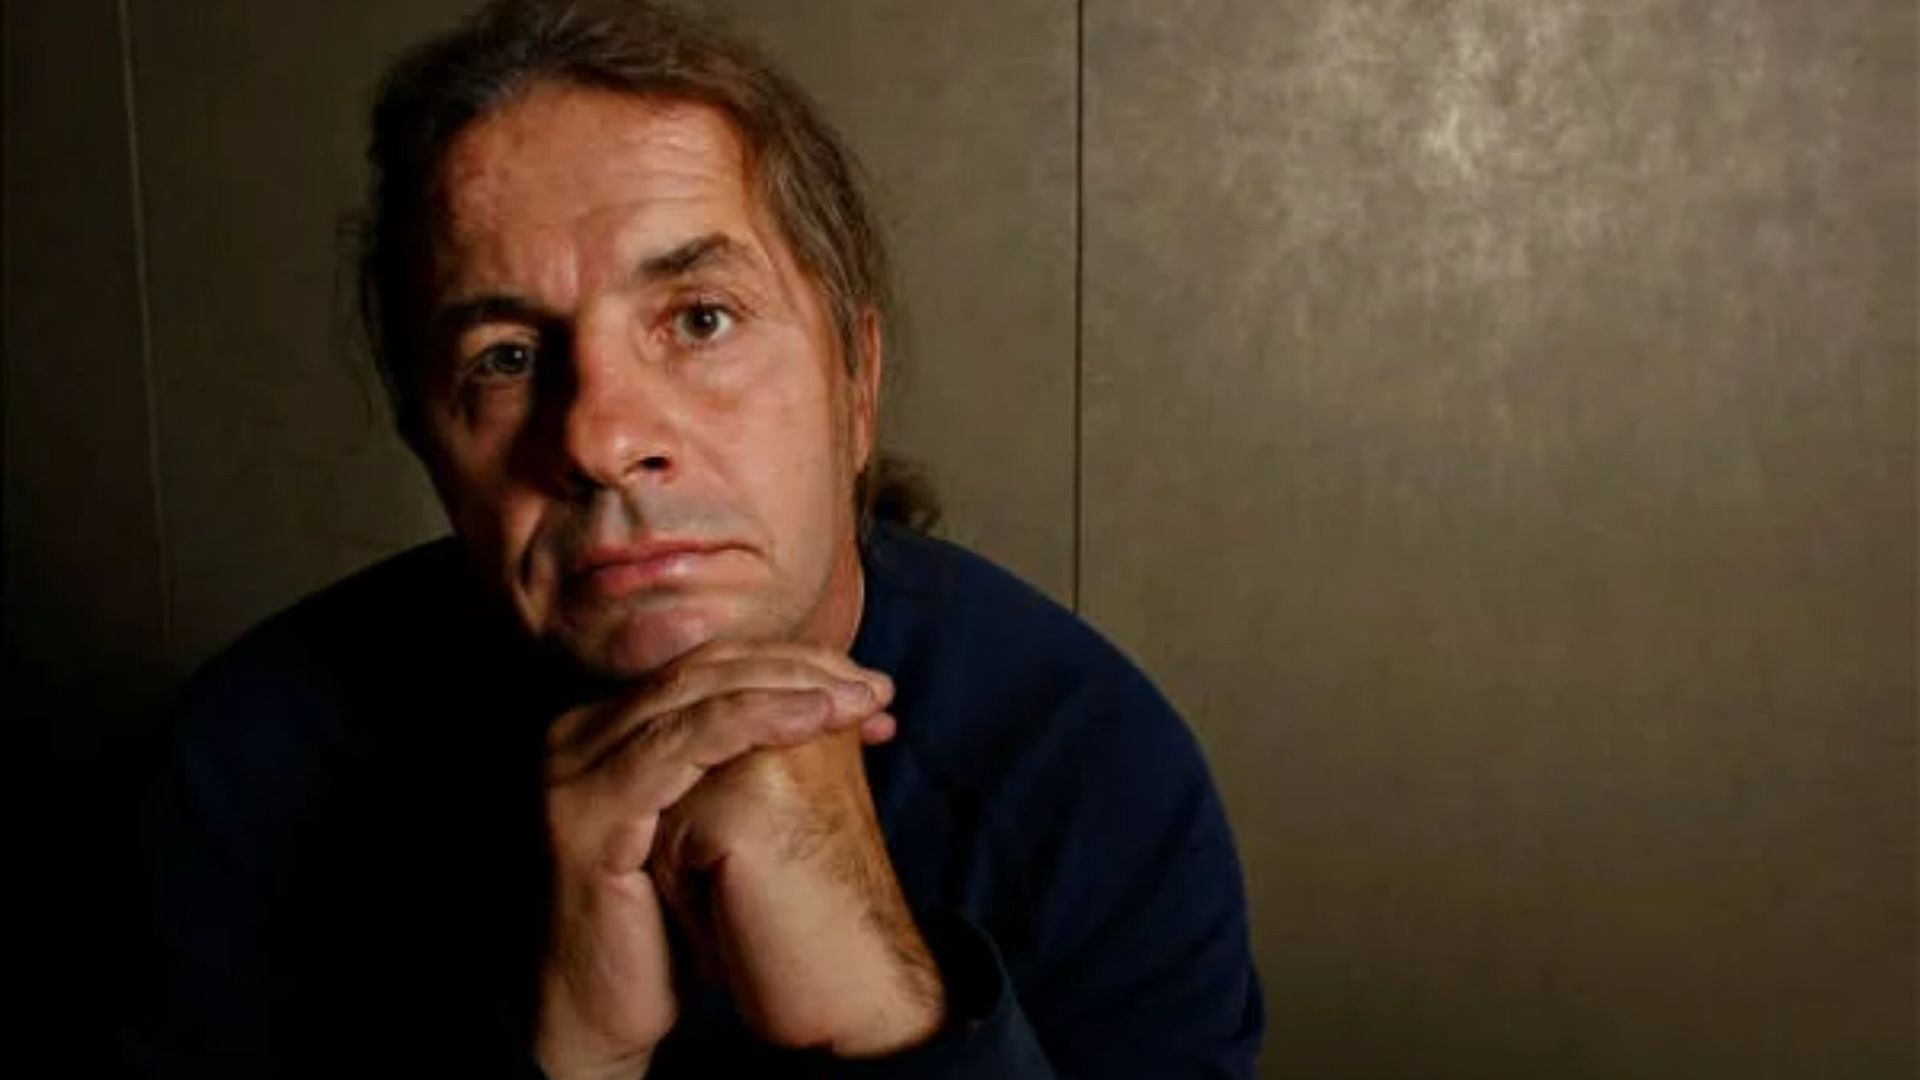 Bret Hart is not in the best health at the moment